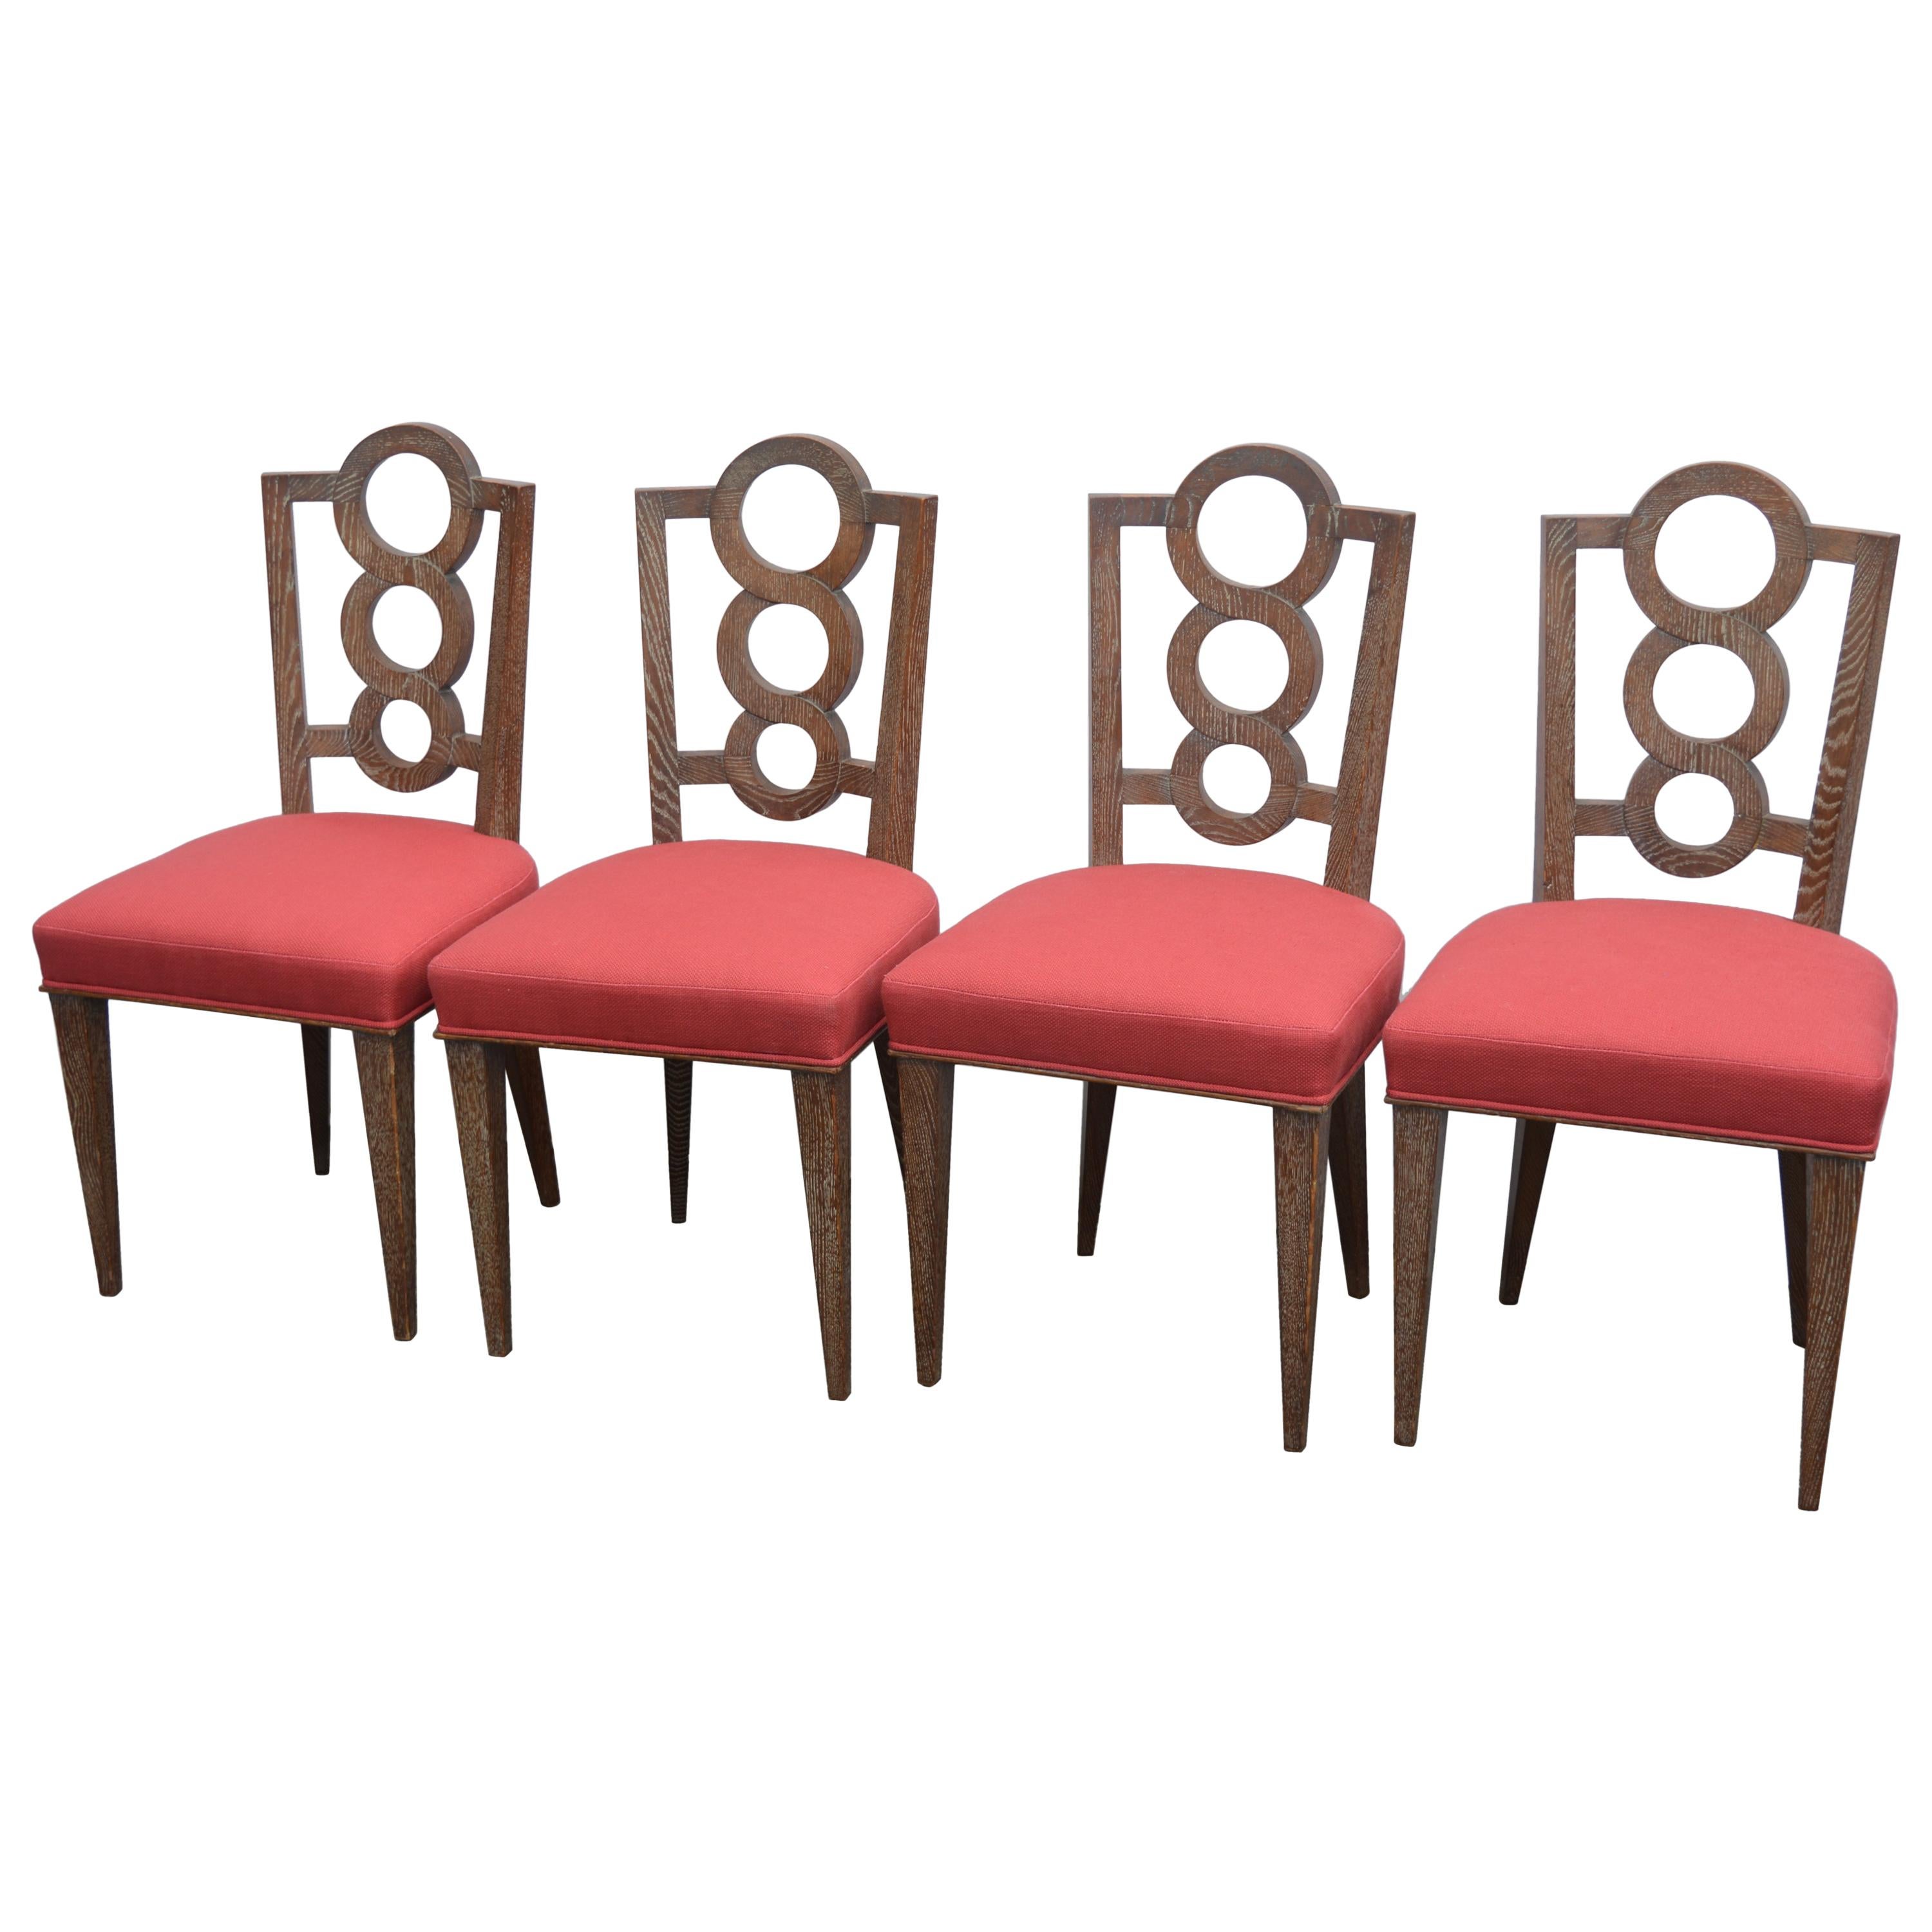 Set of Four Italian Oak Chairs For Sale